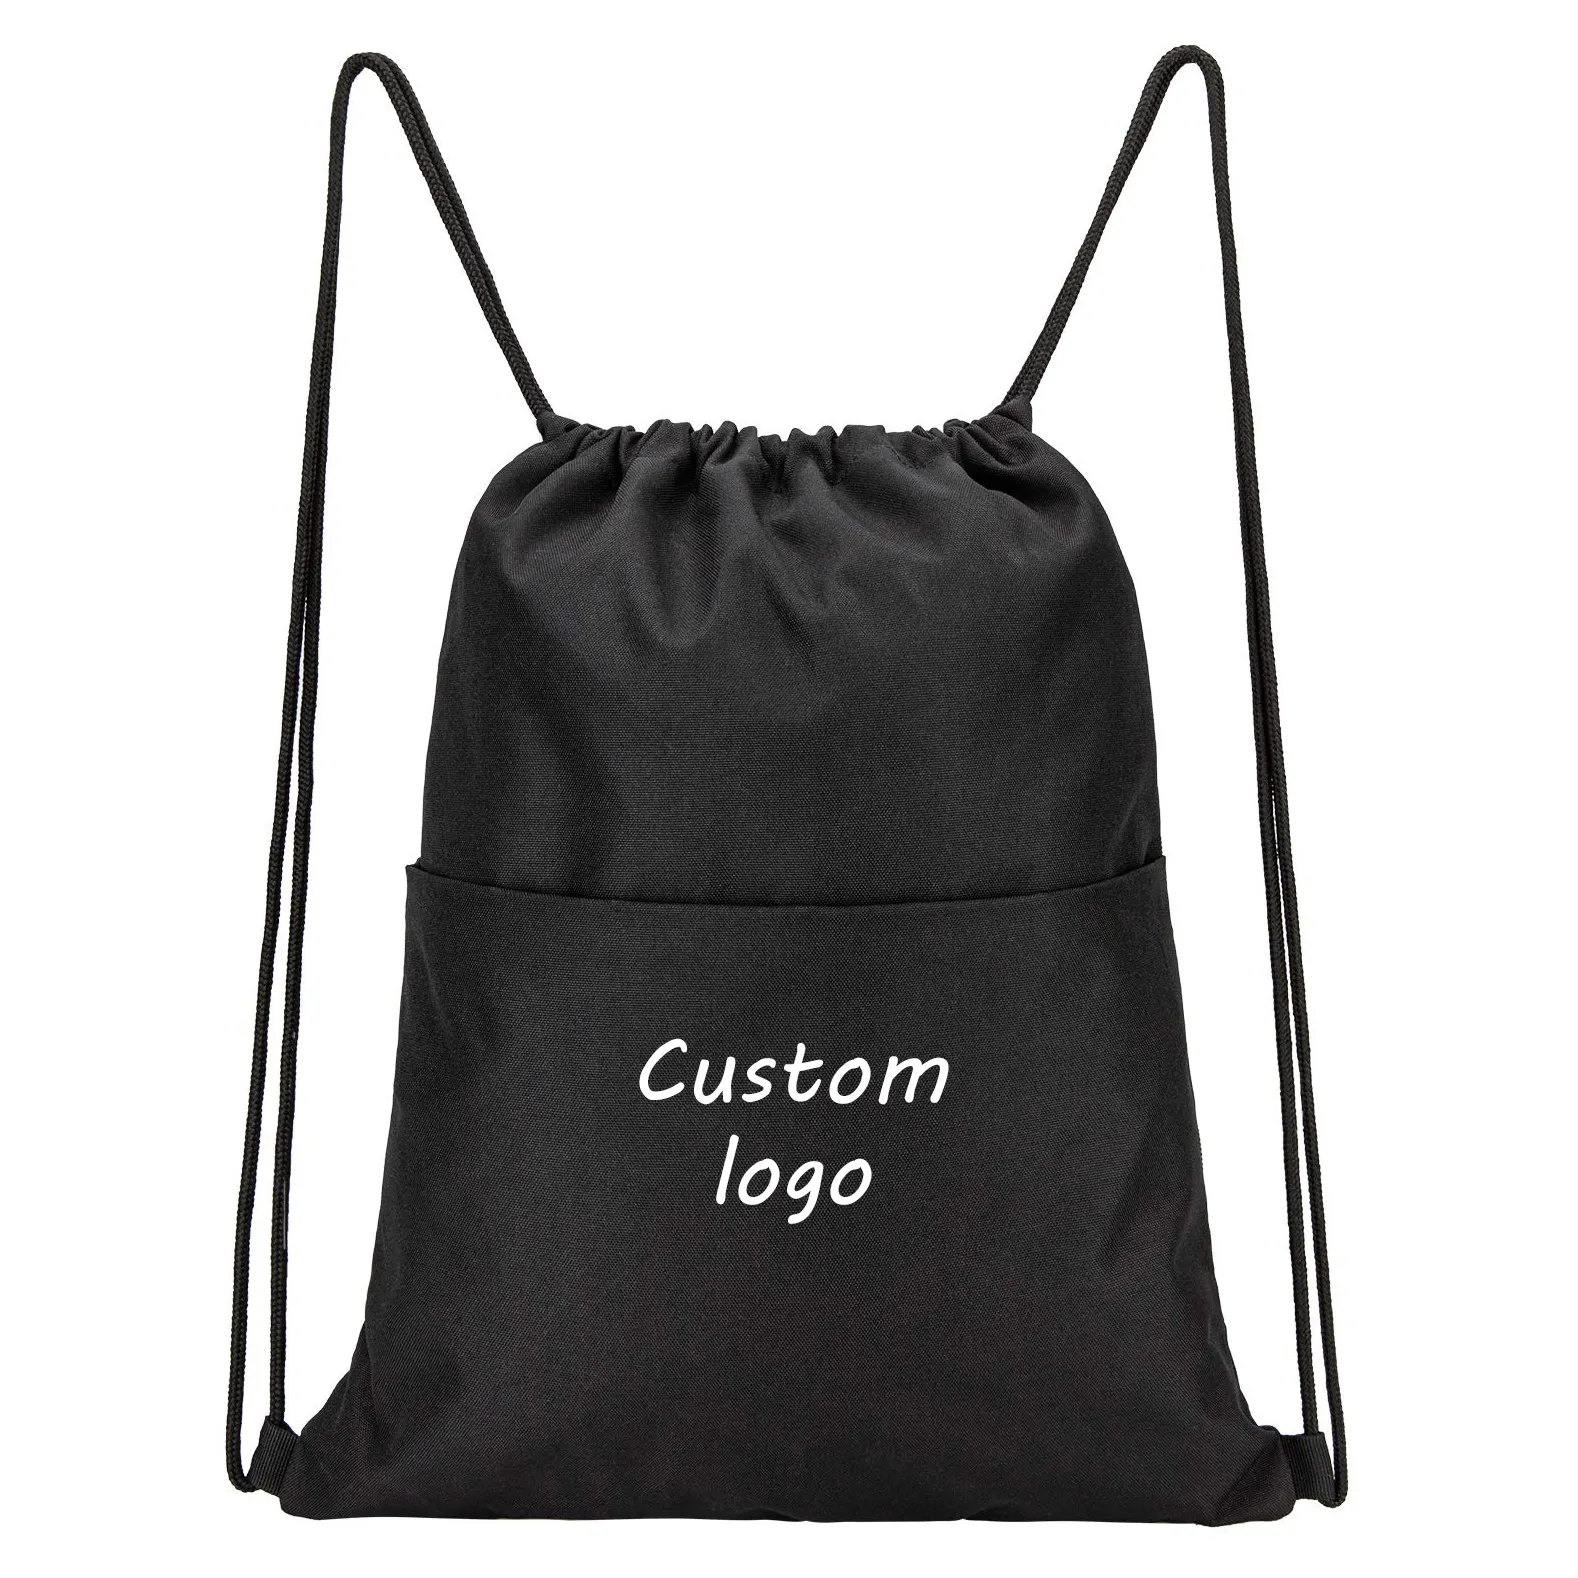 Water Resistant Sports Gym Sack Drawstring Backpacks Reusable Polyester Promotion Gym Draw String Bag With Pocket